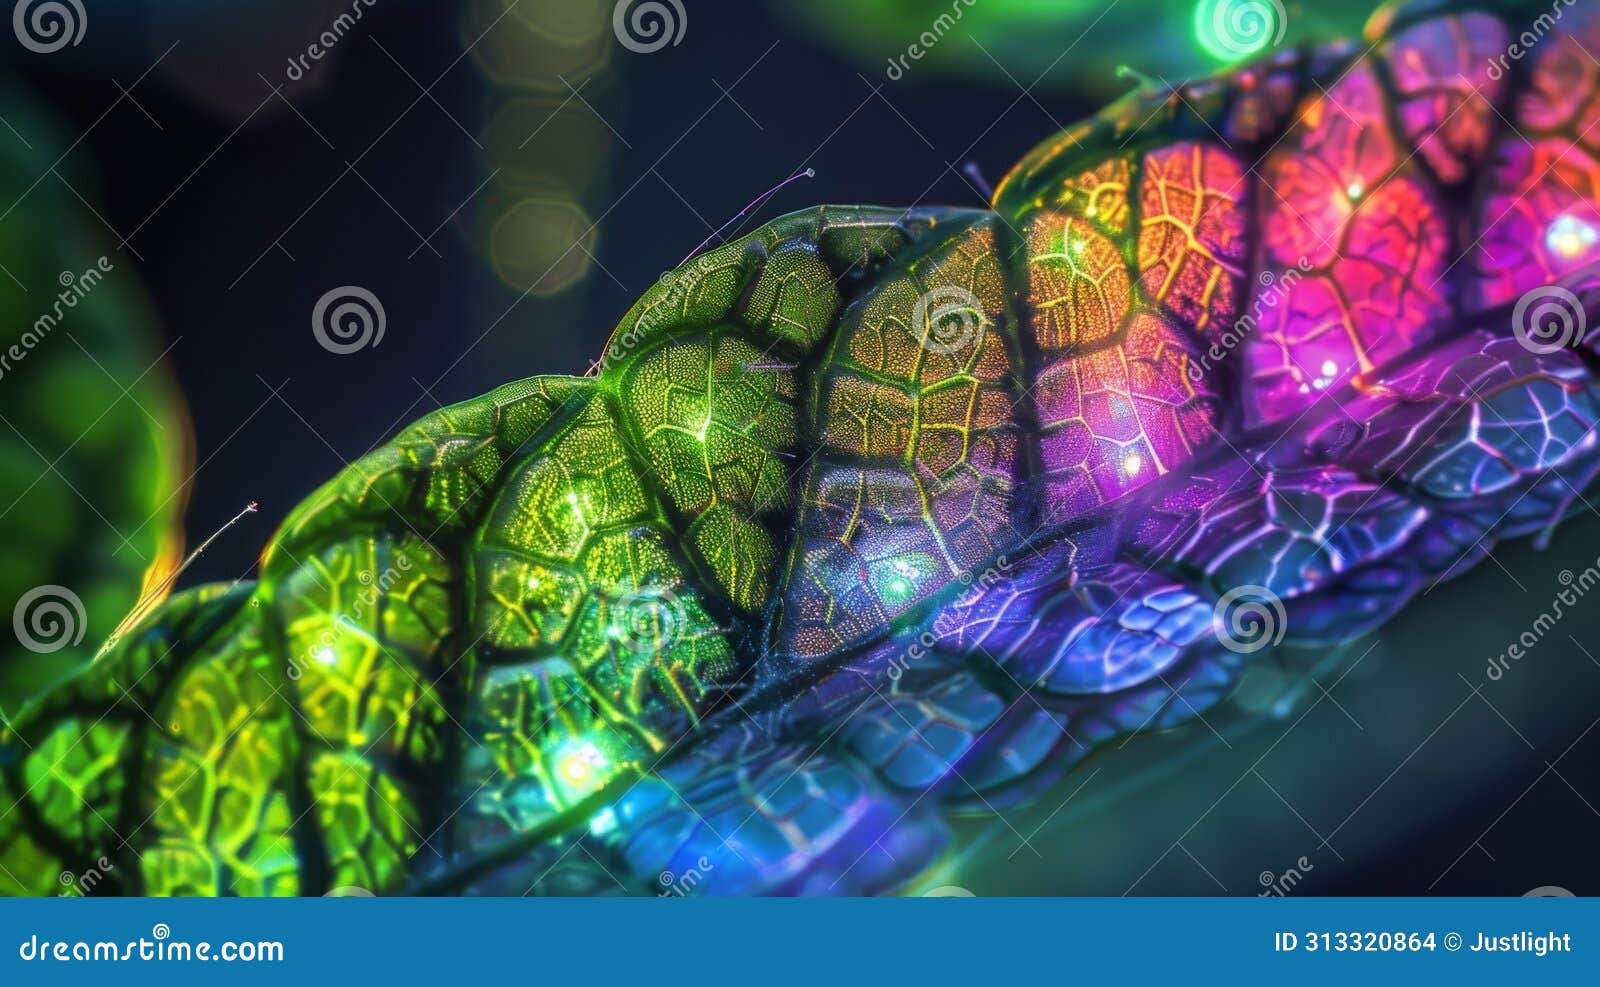 a vibrant image of chloroplasts in a plant leaf with colorful light filtering through and highlighting their existence